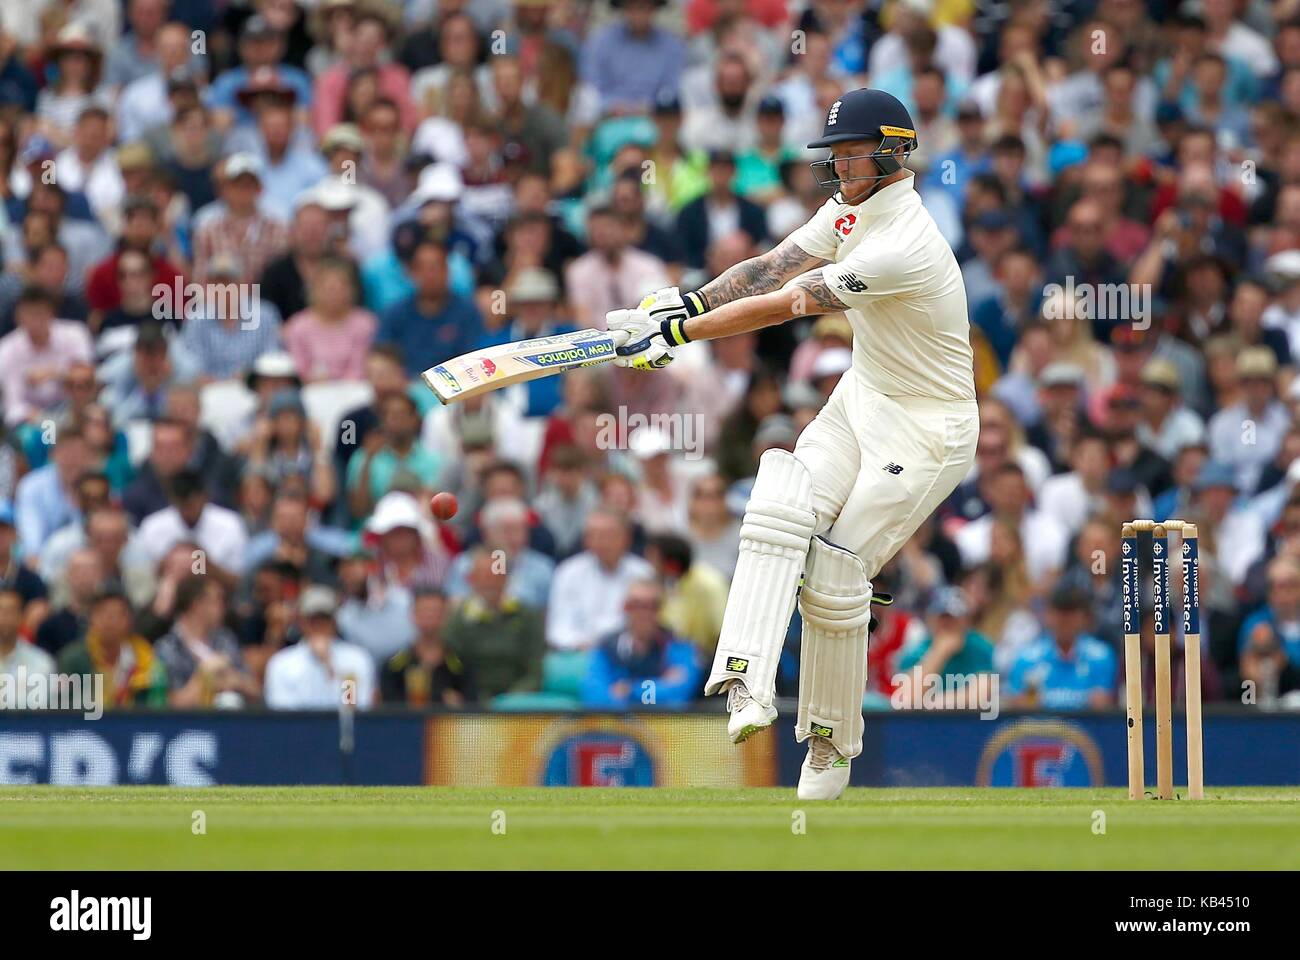 Ben Stokes of England batting during day four of the third Investec Test match between England and South Africa at The Oval in London. 30 Jul 2017 Stock Photo